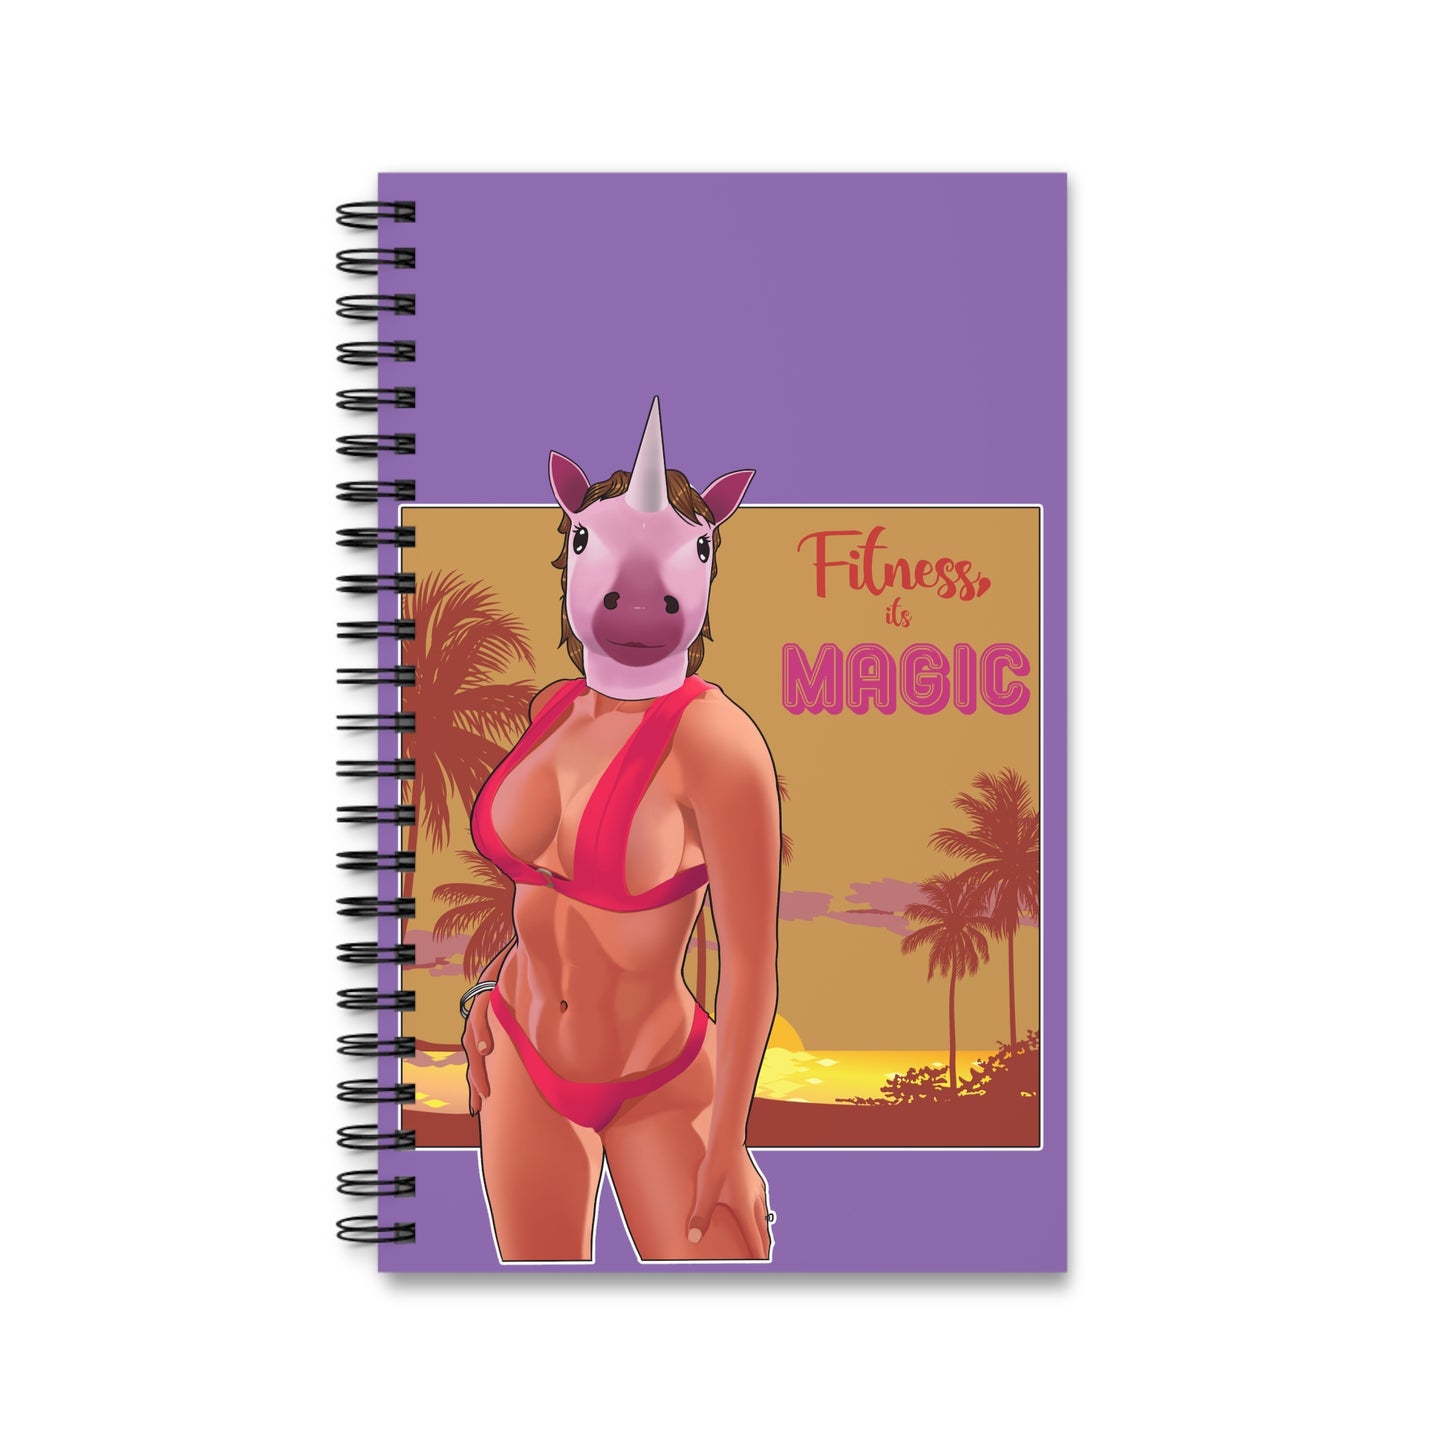 Spiral Fitness is Magic Daily Journal Unicorn Babe